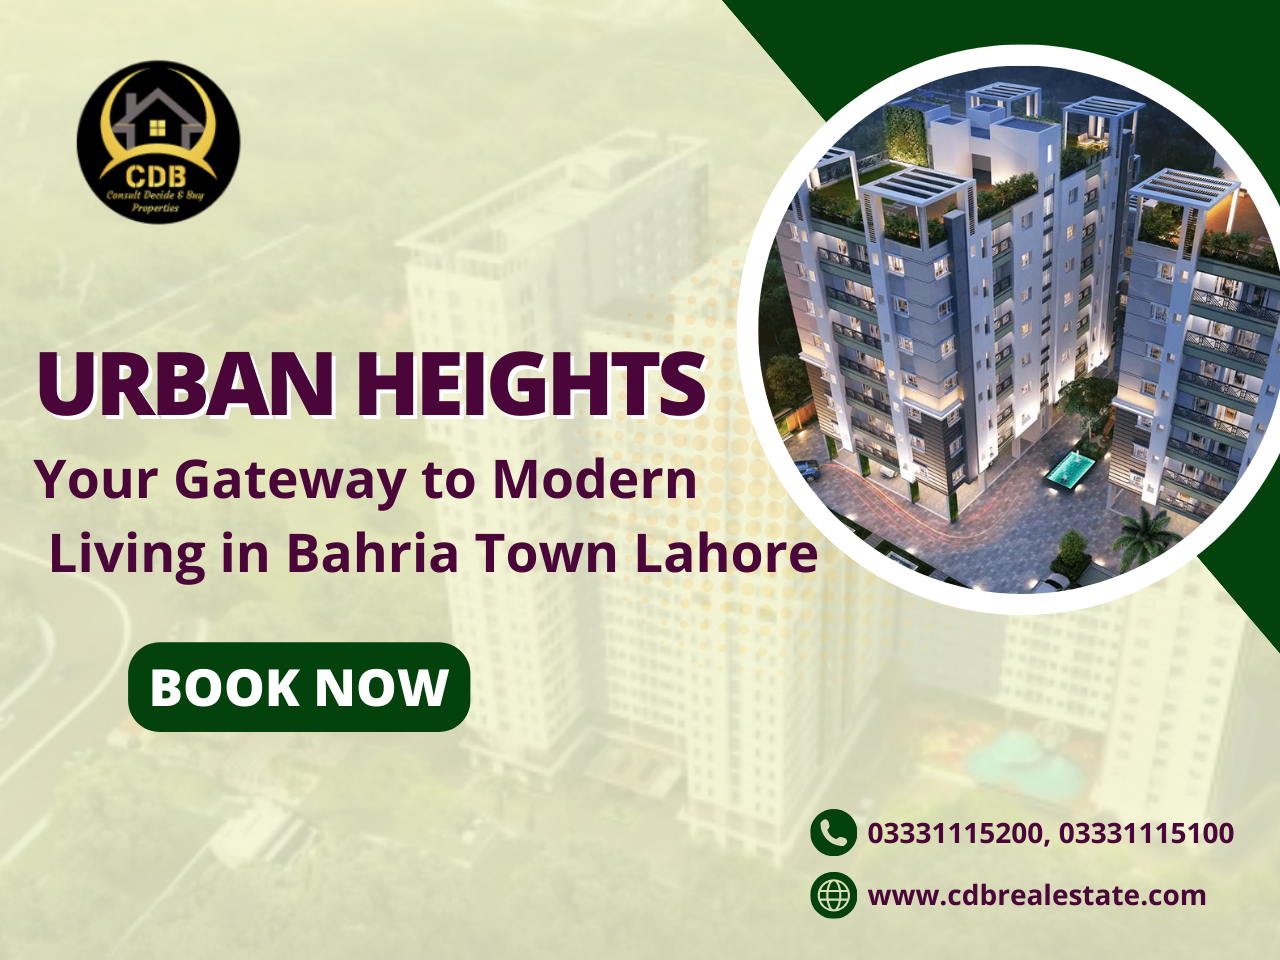 Urban Heights: Your Gateway to Modern Living in Bahria Town Lahore